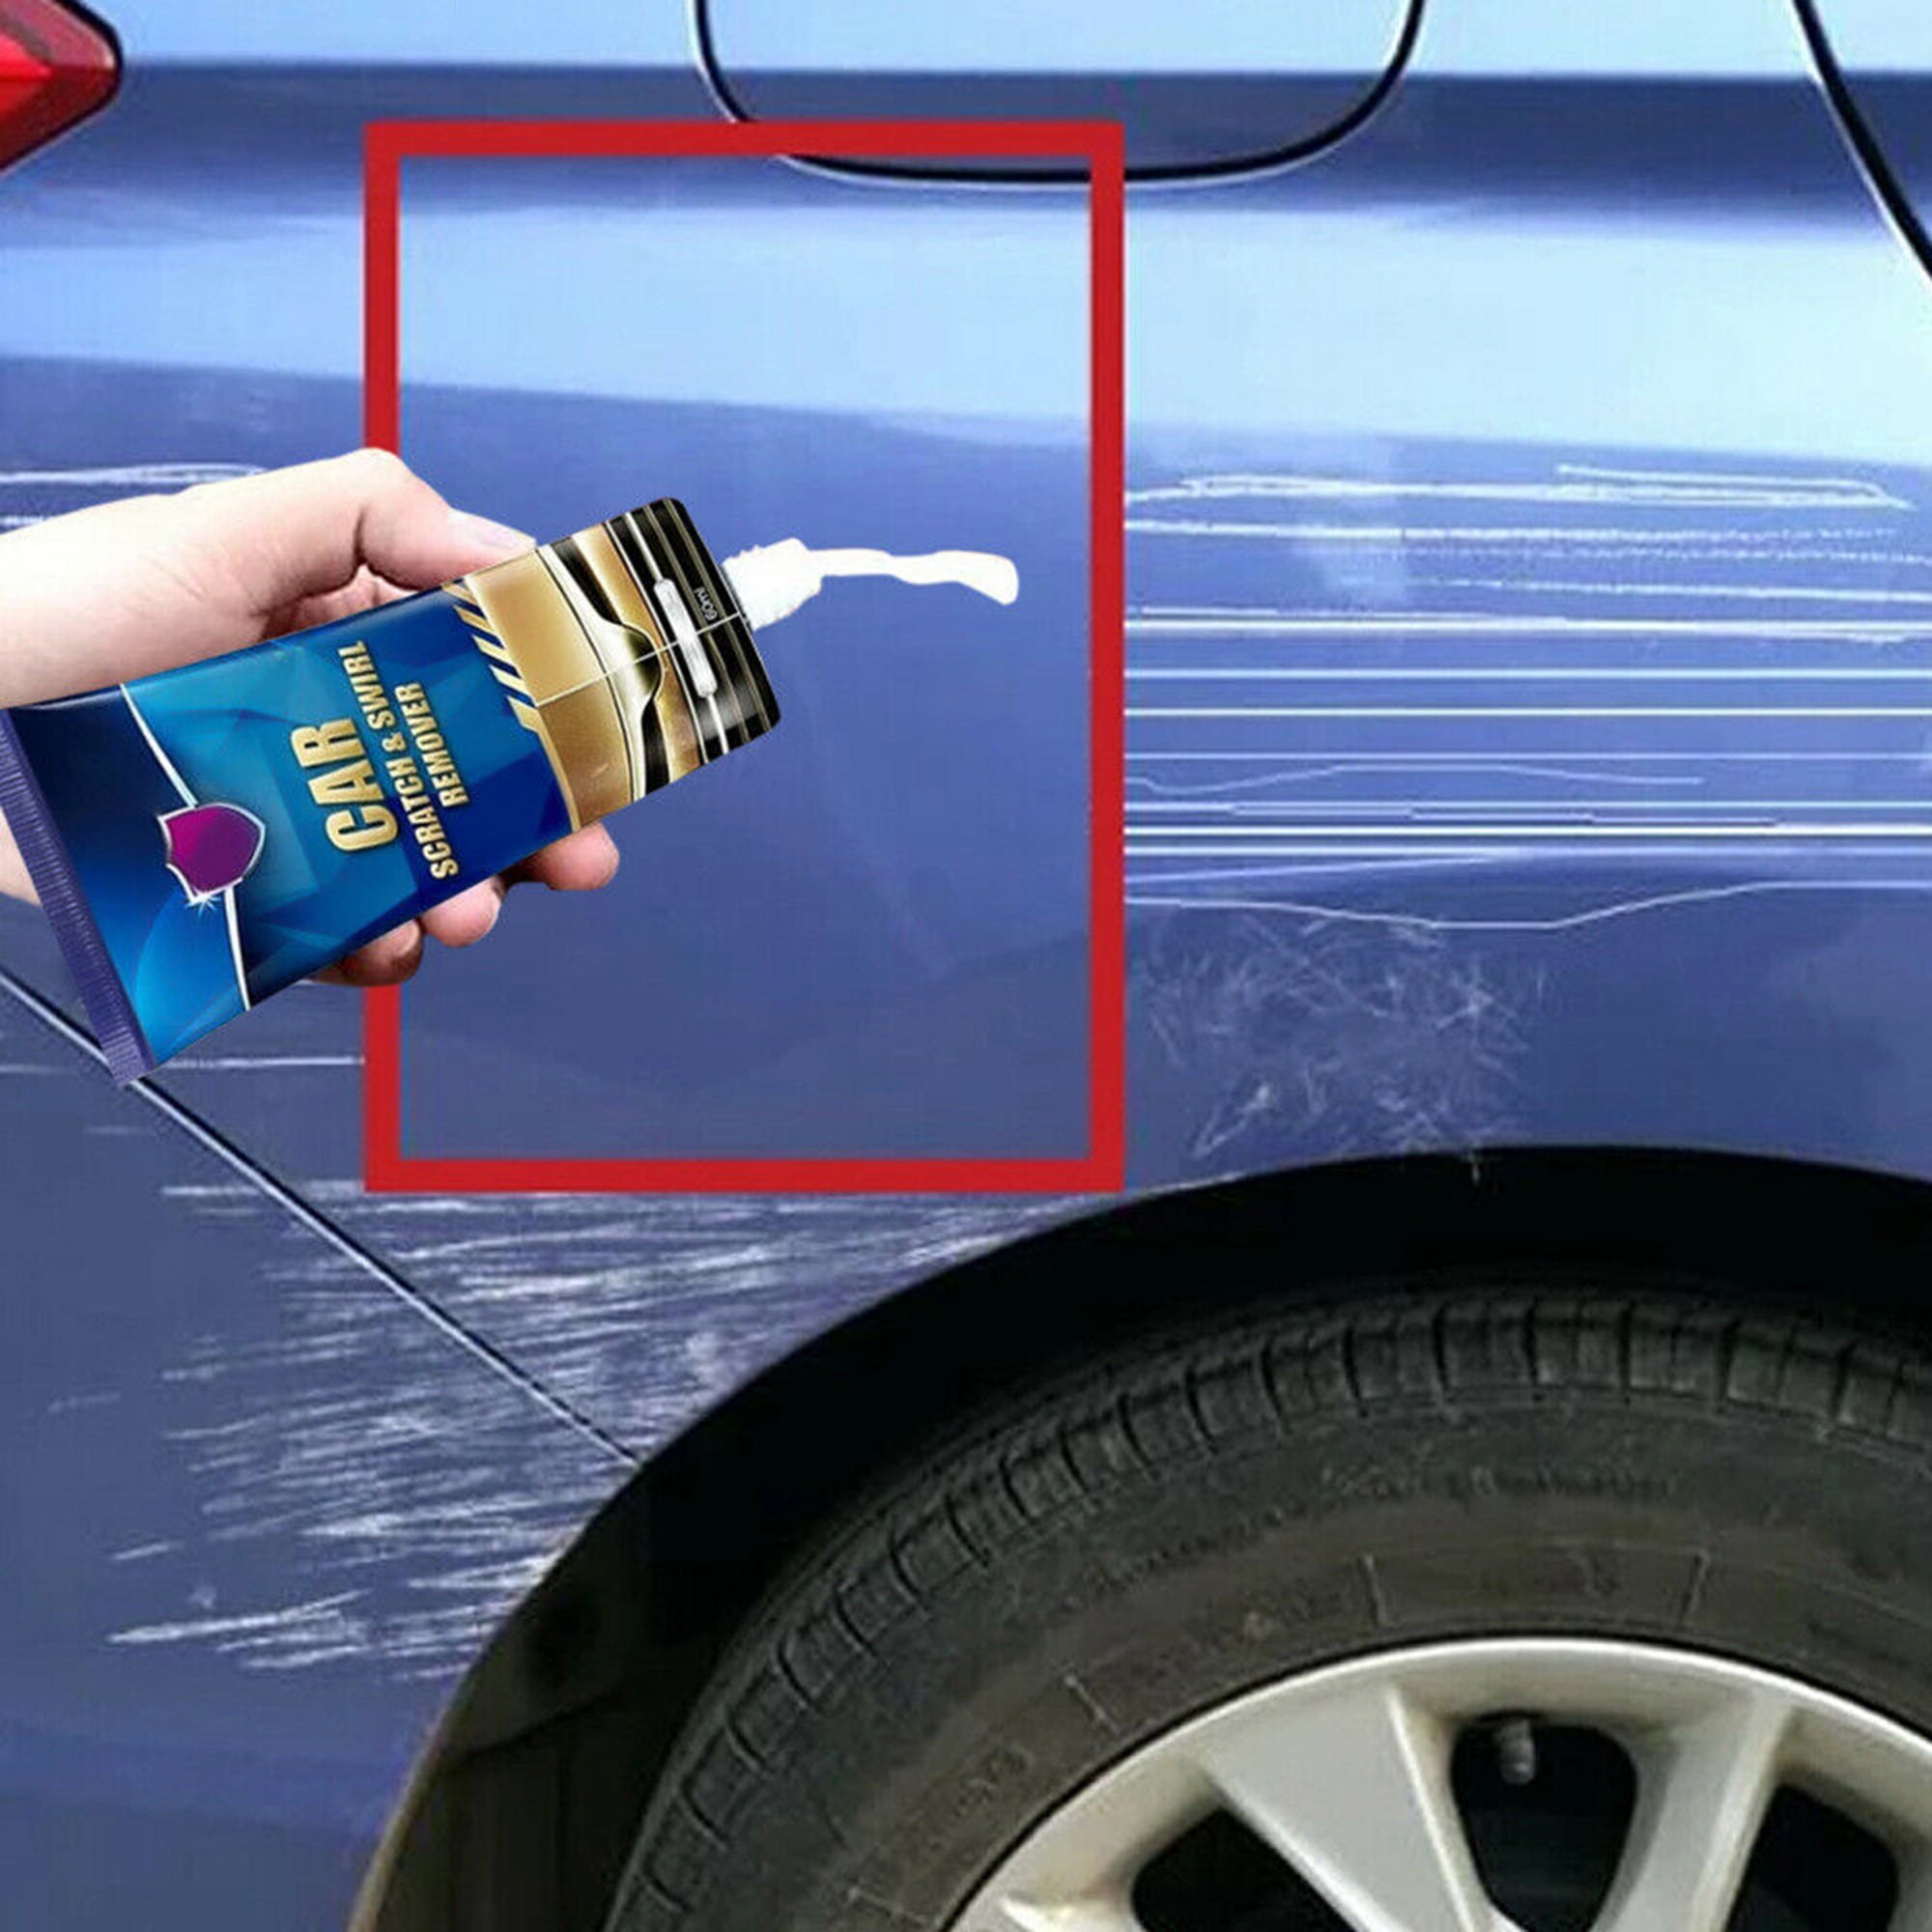 Magic Car Scratch Repair Kit Paint Scratch Remover For Vehicles Paint  Remover Car Wax Polishing Compound Wax Erase Car Scratches - AliExpress